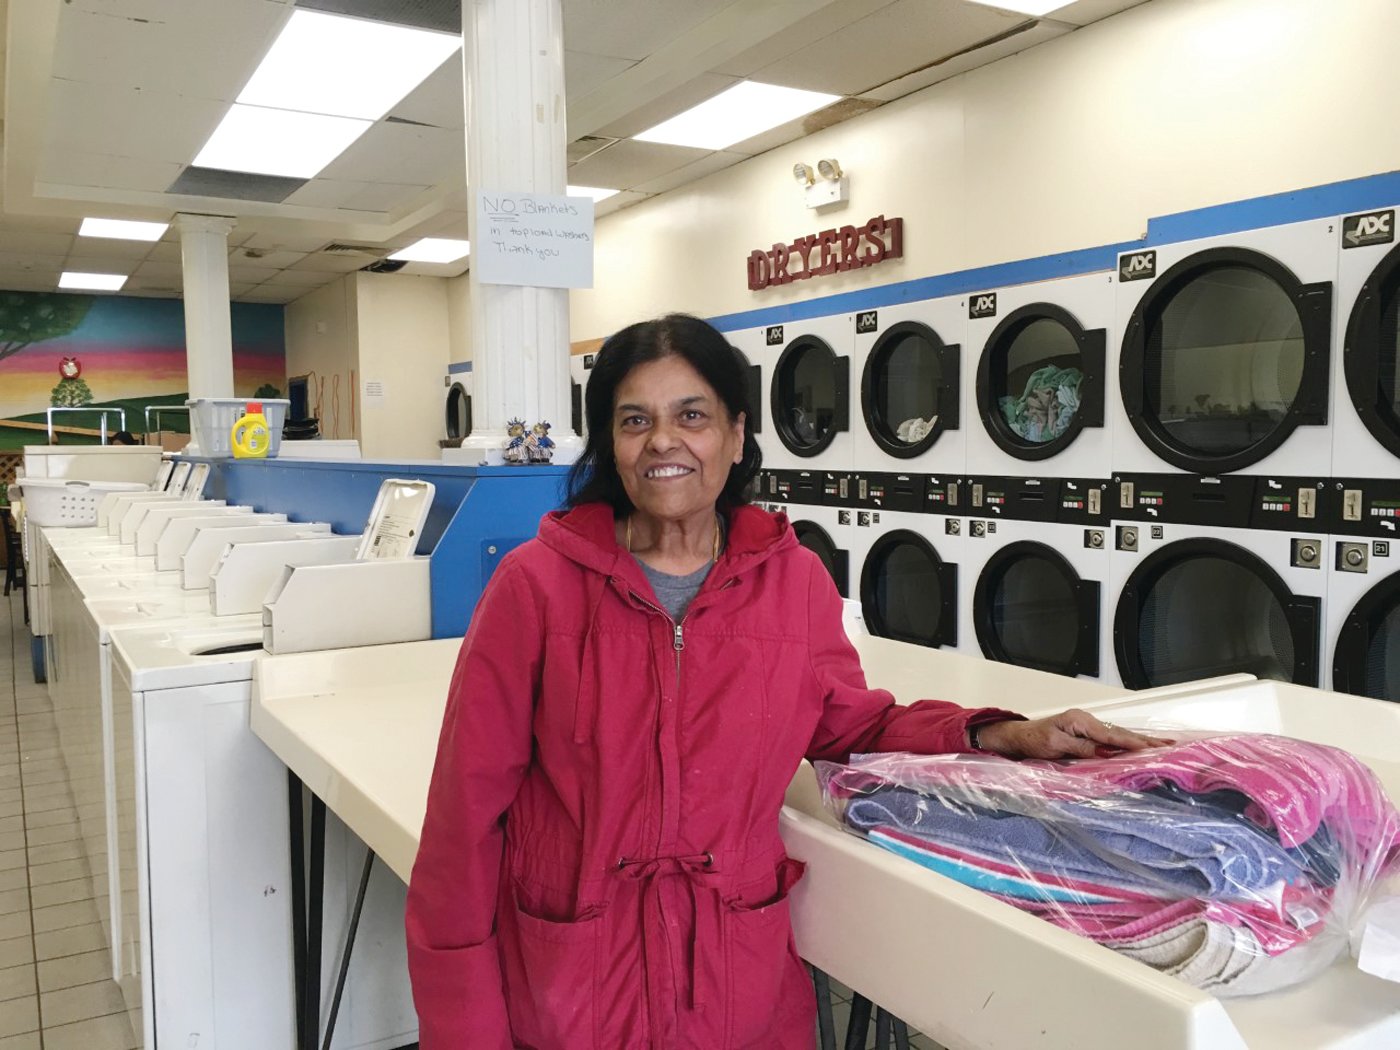 Come to Kaushal Jain of Jain’s Laundry, a familiar laundromat on Putnam Pike in Johnston, for all your wash/dry/fold laundry needs and for self-service washing & drying machines.